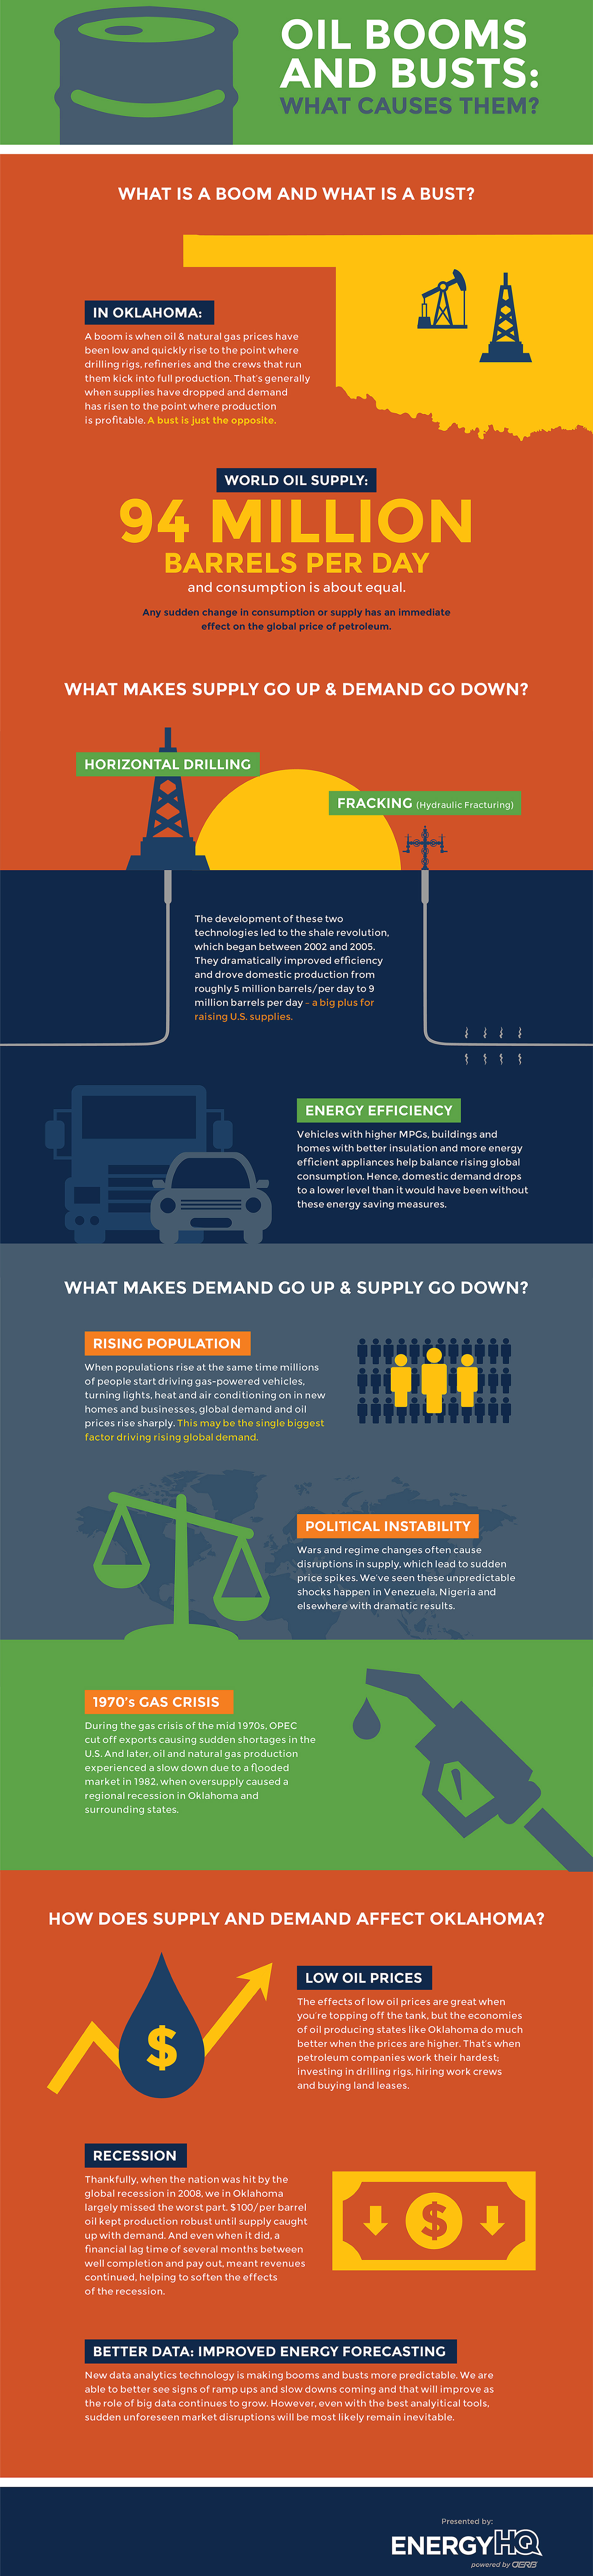 oil boom and oil busts infographic from EnergyHQ